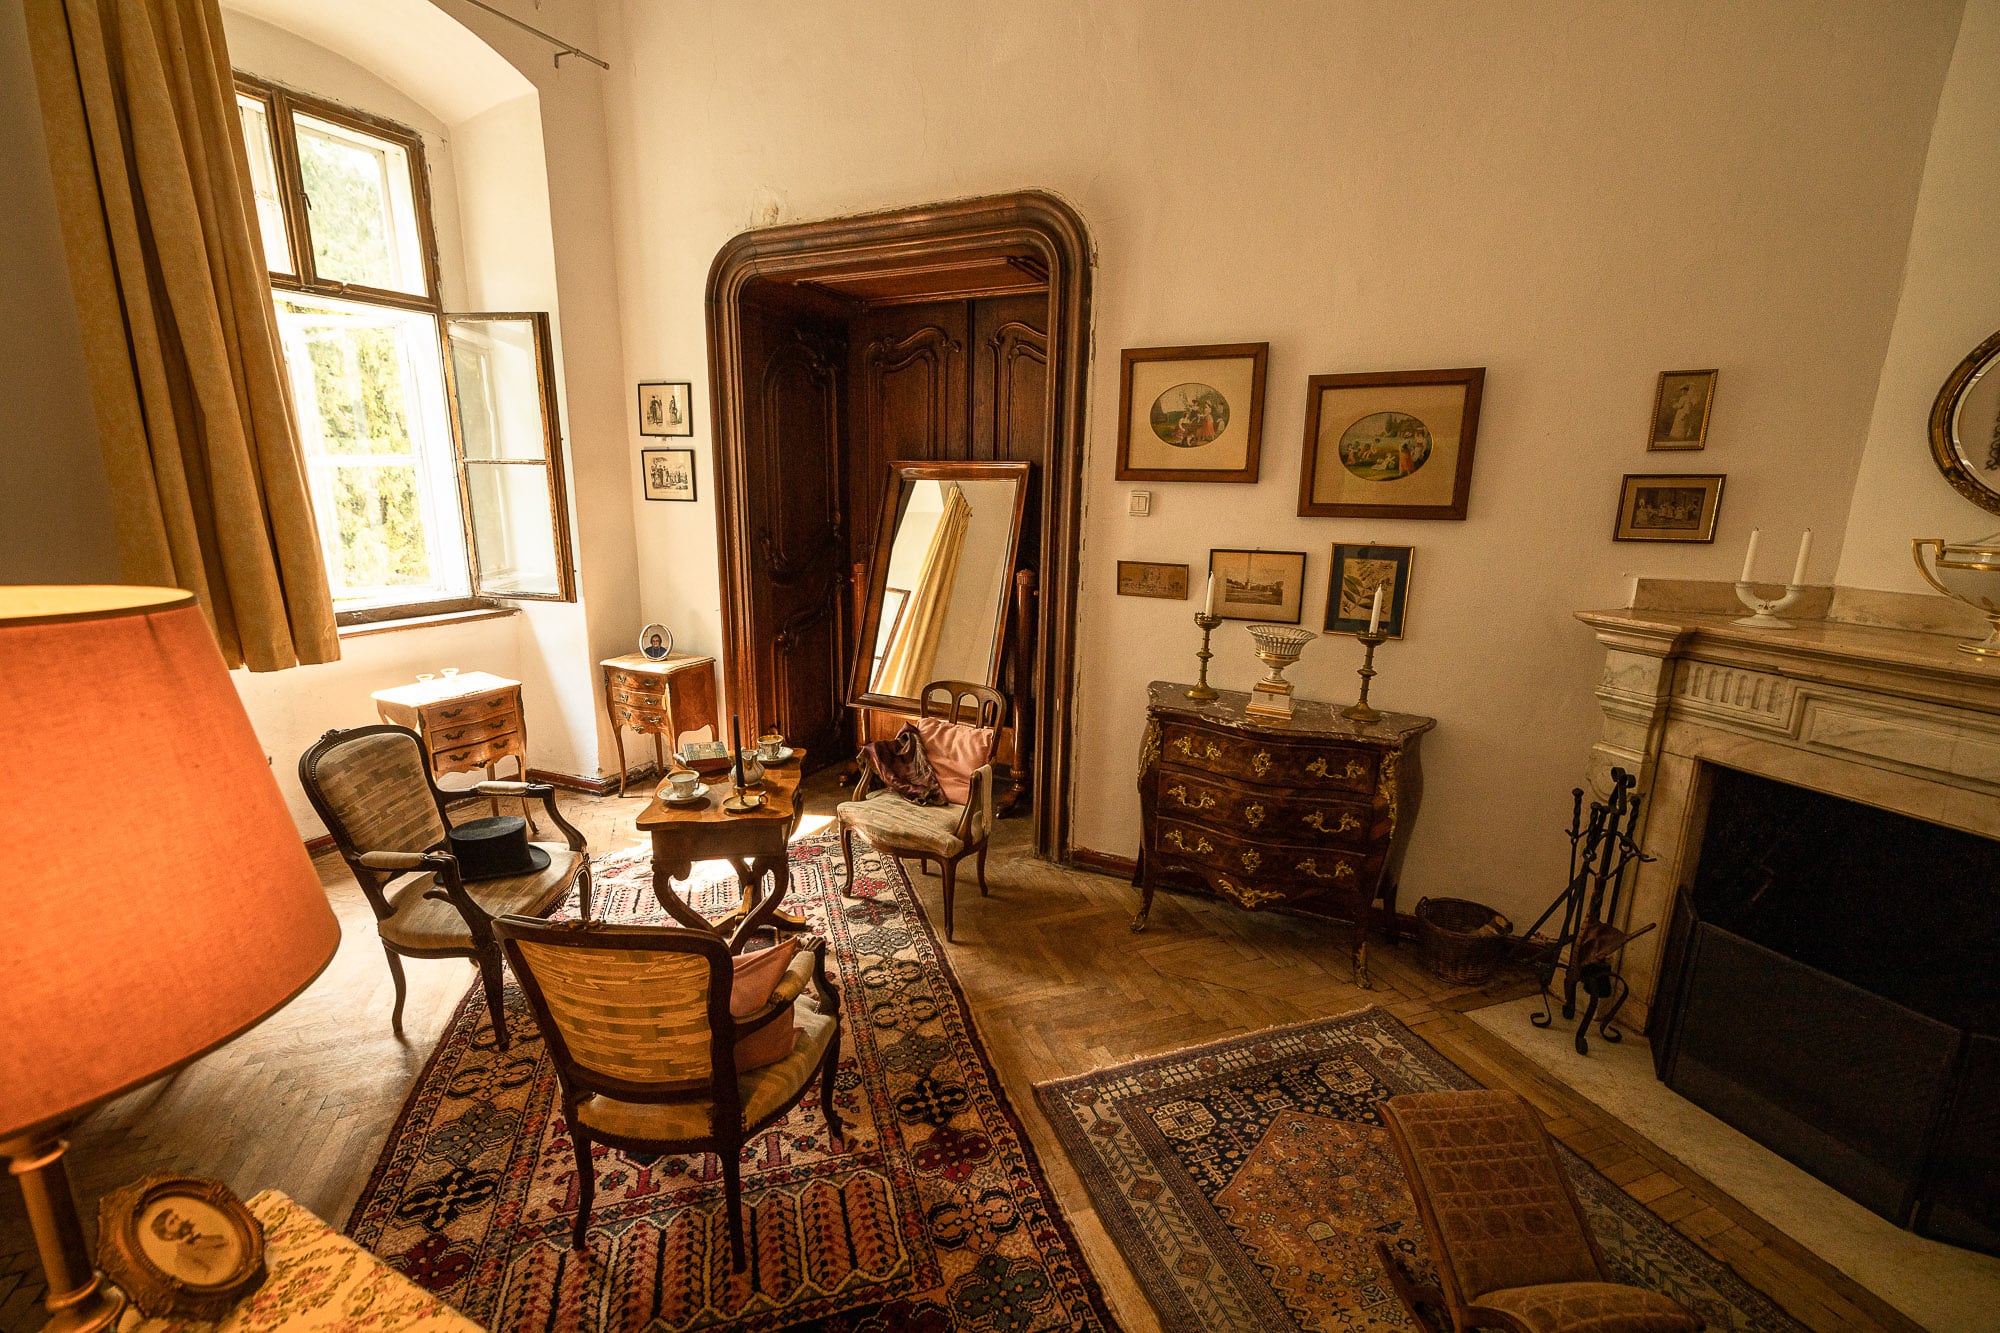 recreation of a historical room